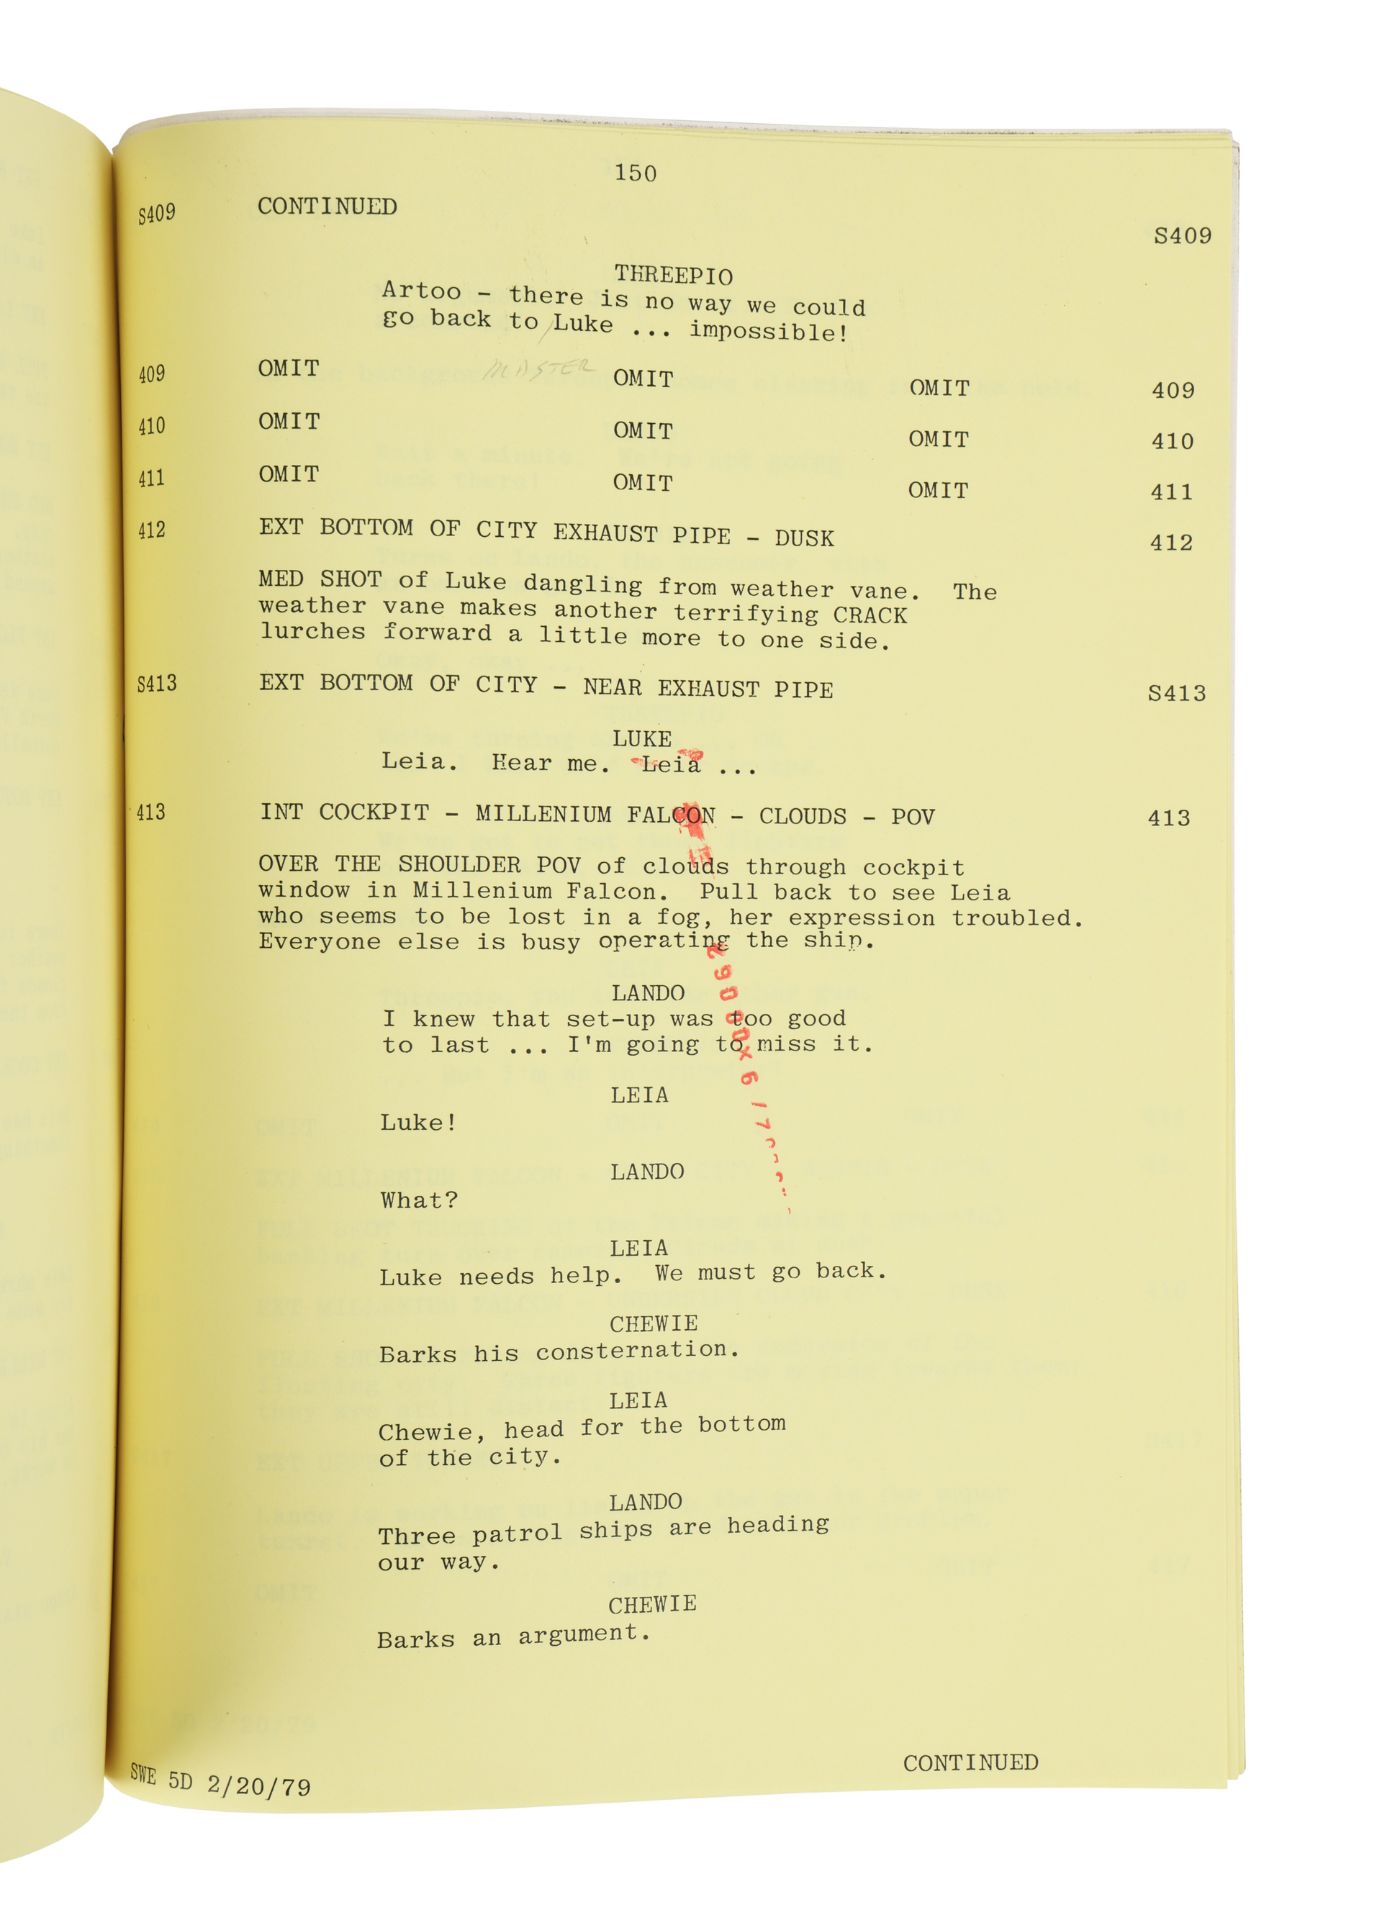 STAR WARS: THE EMPIRE STRIKES BACK (1980) - Anthony Daniels Collection: Hand-annotated Partial Scrip - Image 11 of 12